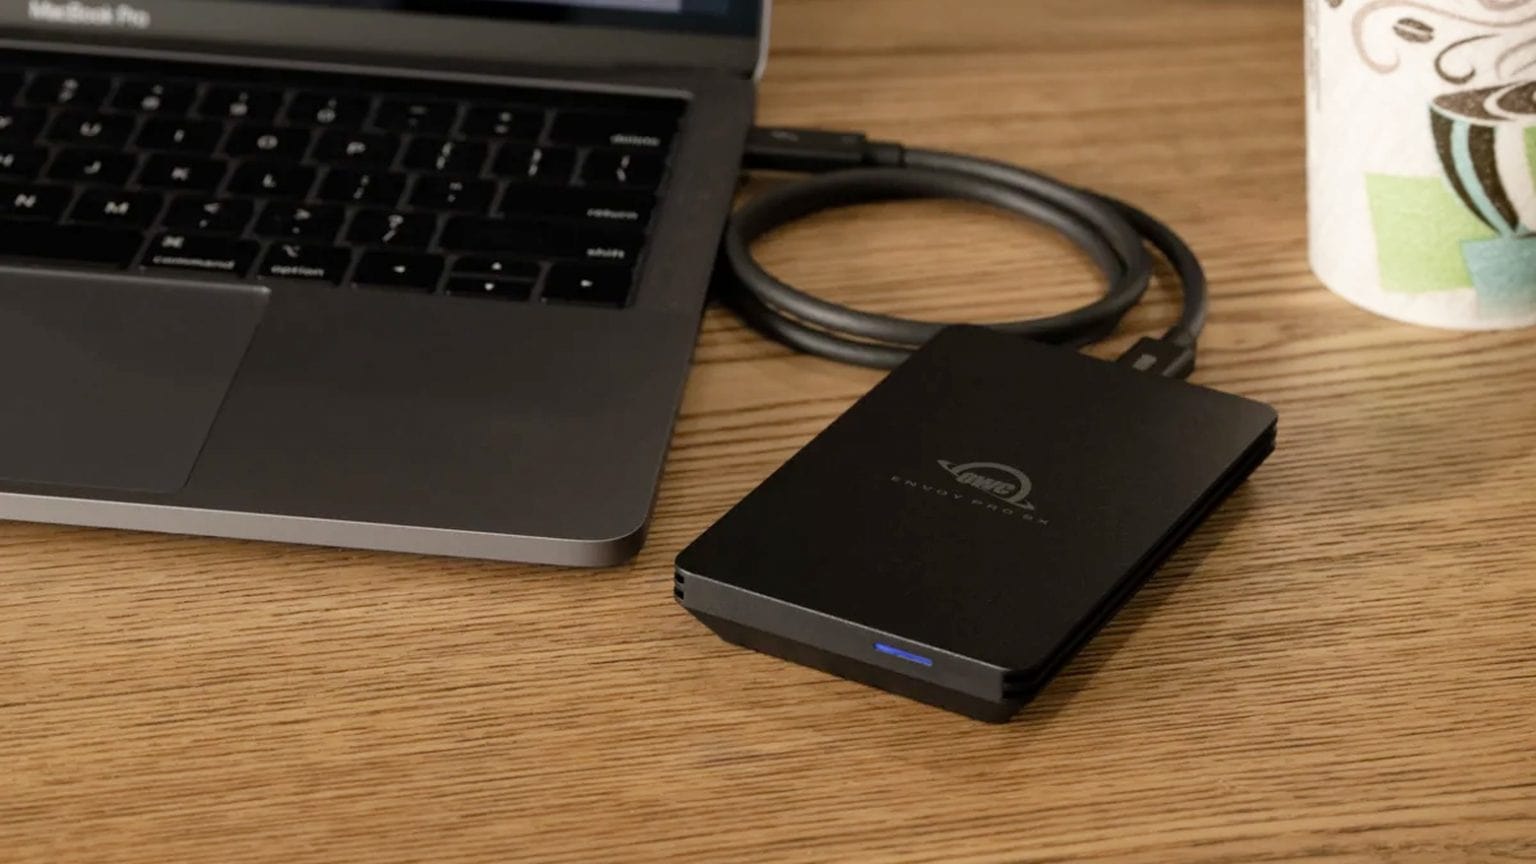 Save time with super-fast OWC Envoy Pro SX portable Thunderbolt SSD